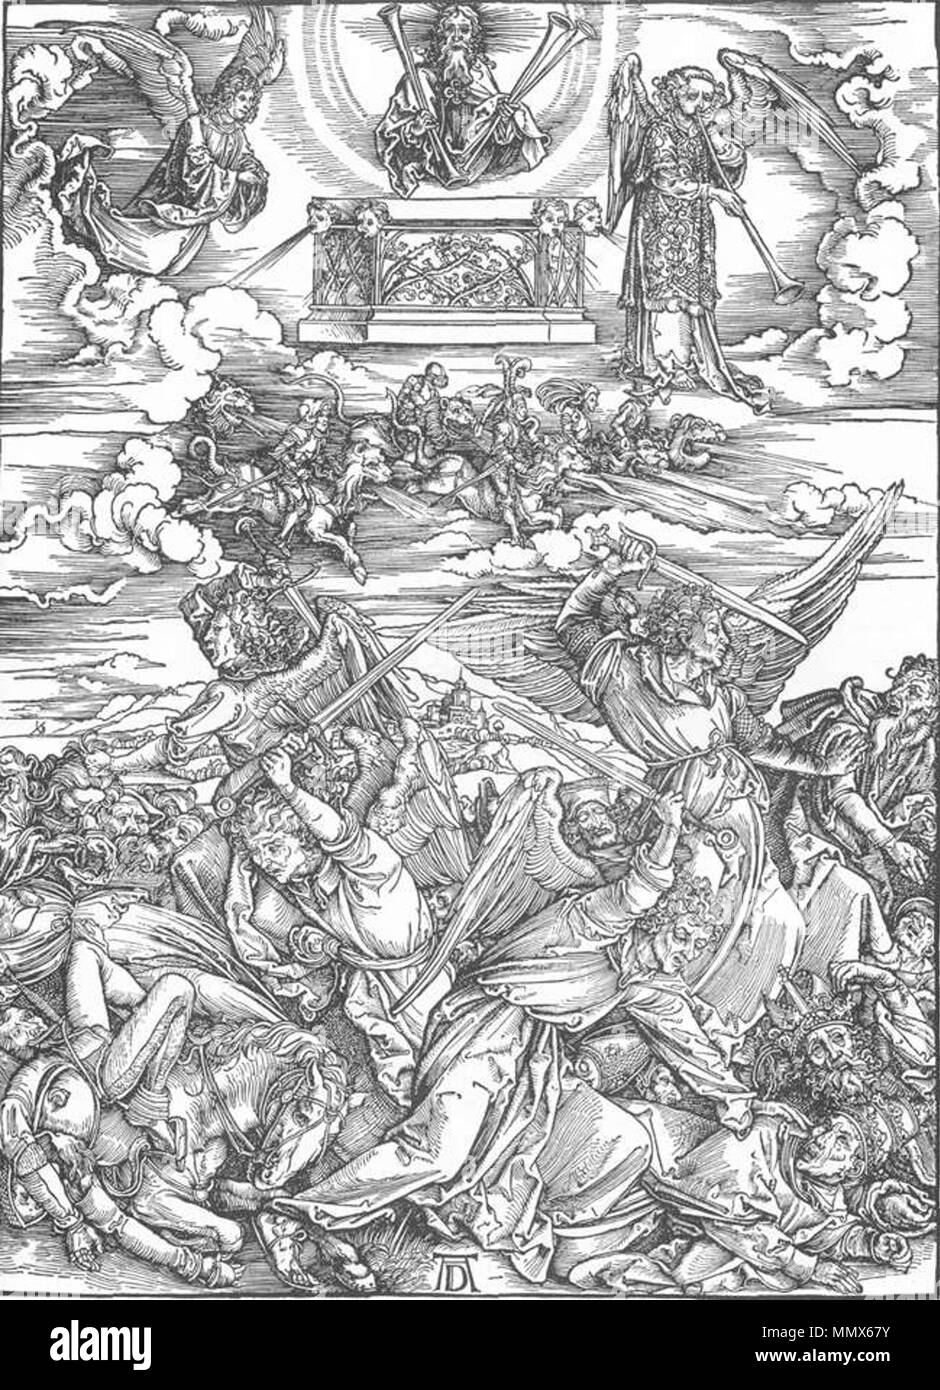 . The Revelation of St John: The Battle of the Angels Woodcut, 39 x 28 cm Staatliche Kunsthalle, Karlsruhe  . between 1497 and 1498. see filename or category Durer, apocalisse, 08 battaglia degli angeli Stock Photo